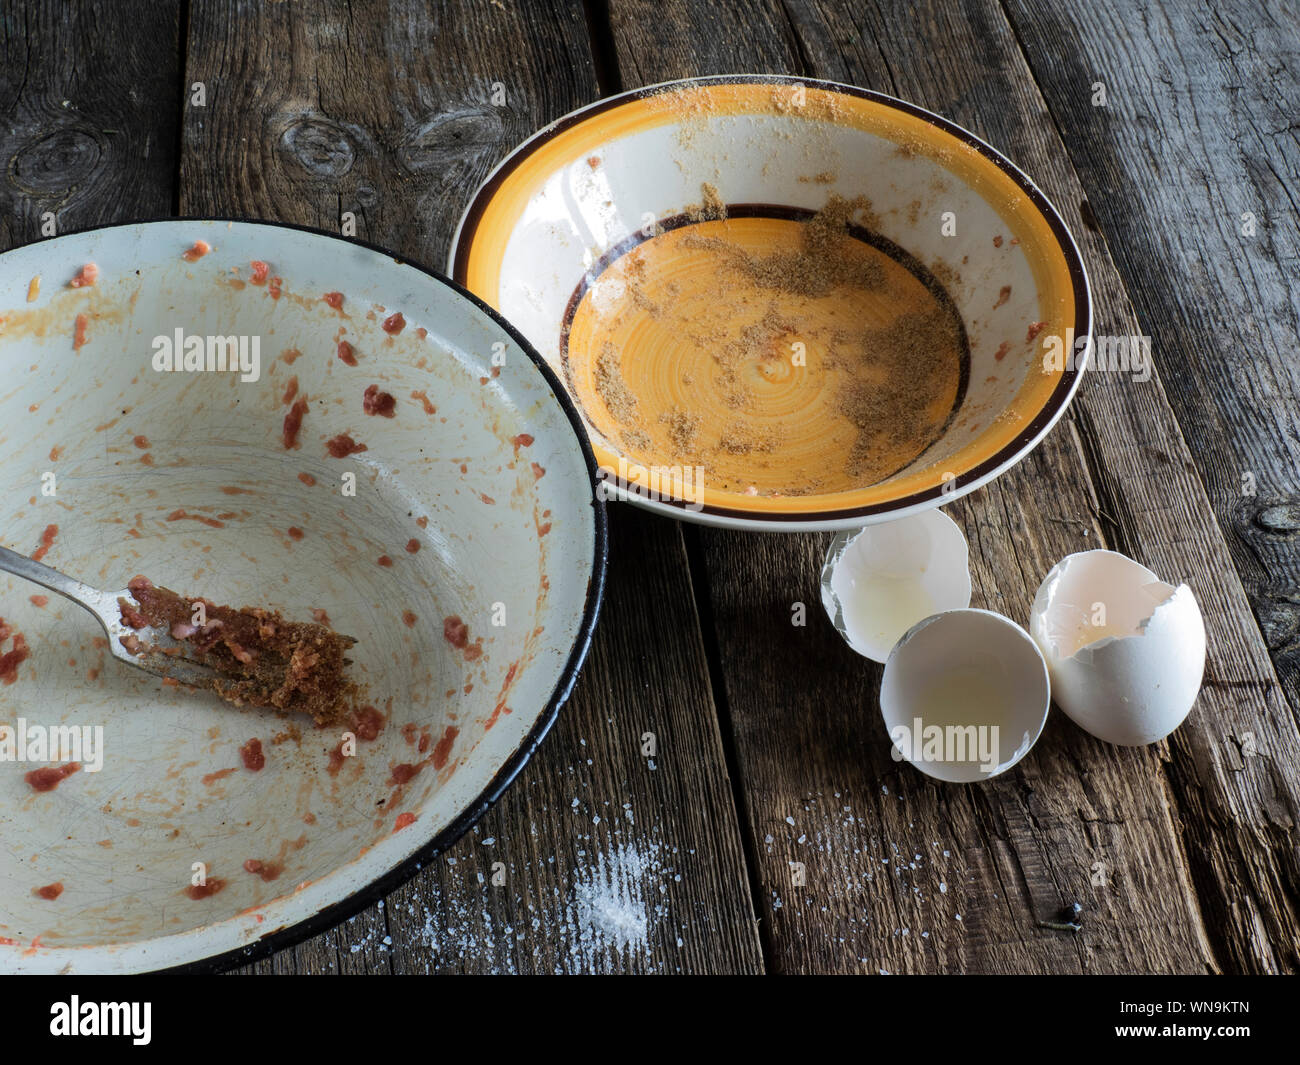 Leftovers In Plate By Eggshells At Wooden Table Stock Photo